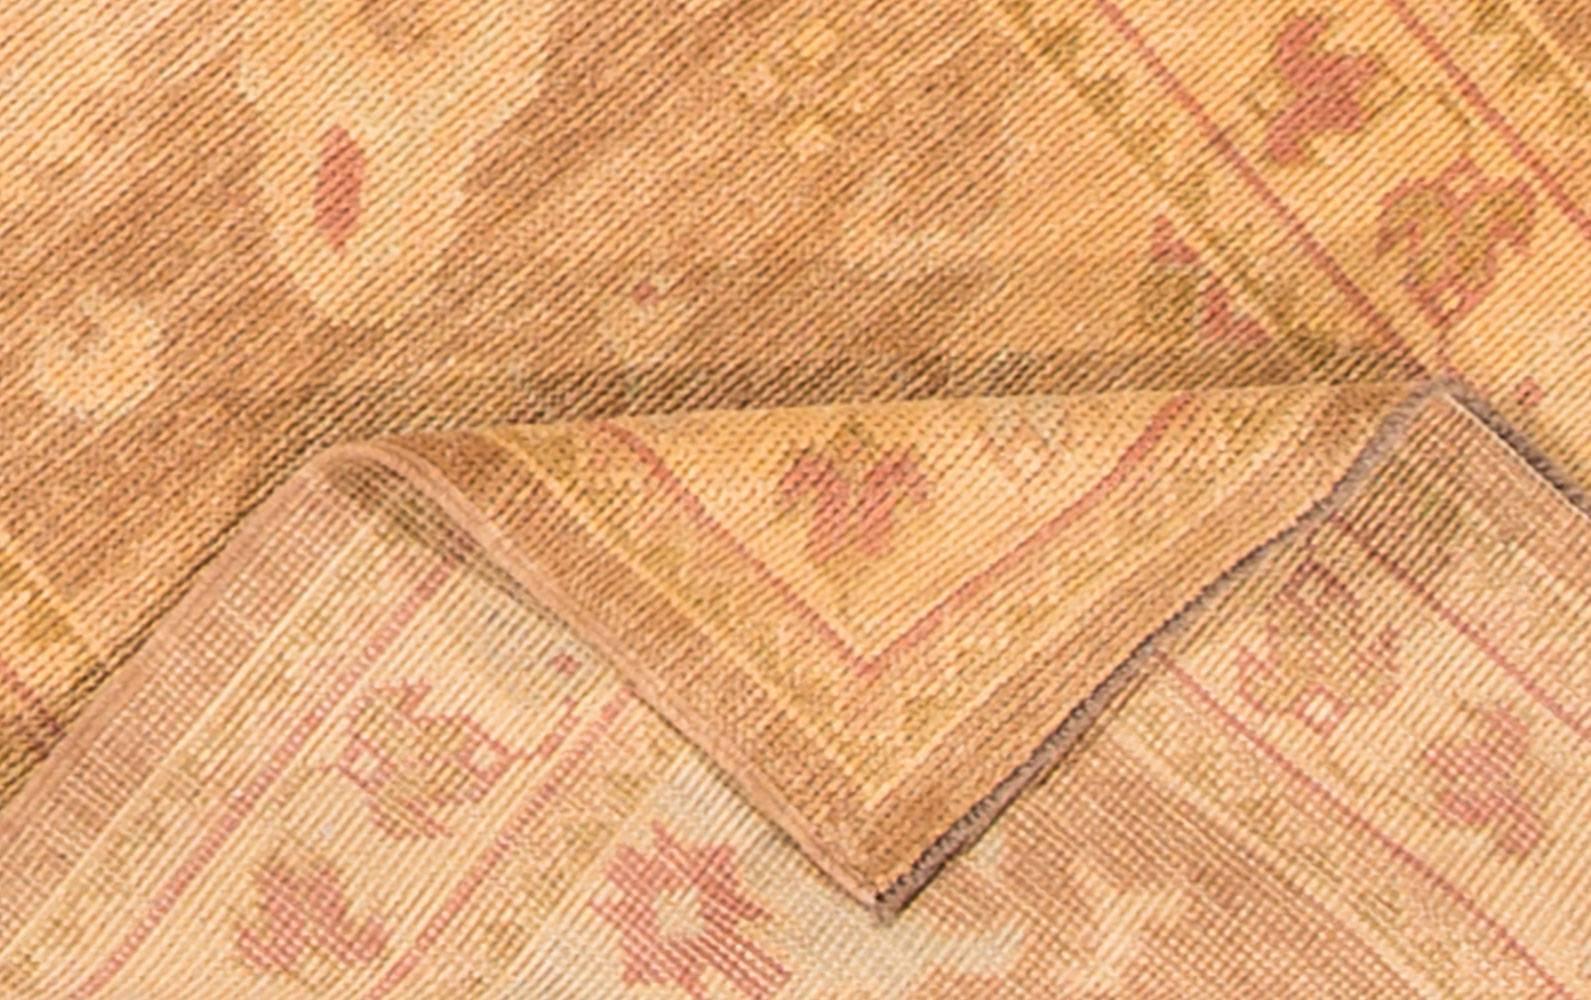 21st century Turkish Oushak runner rug. This piece features a thin double border, peachy-beige field, and traditional all-over design in lighter earth tones. Measures 3x10.02.